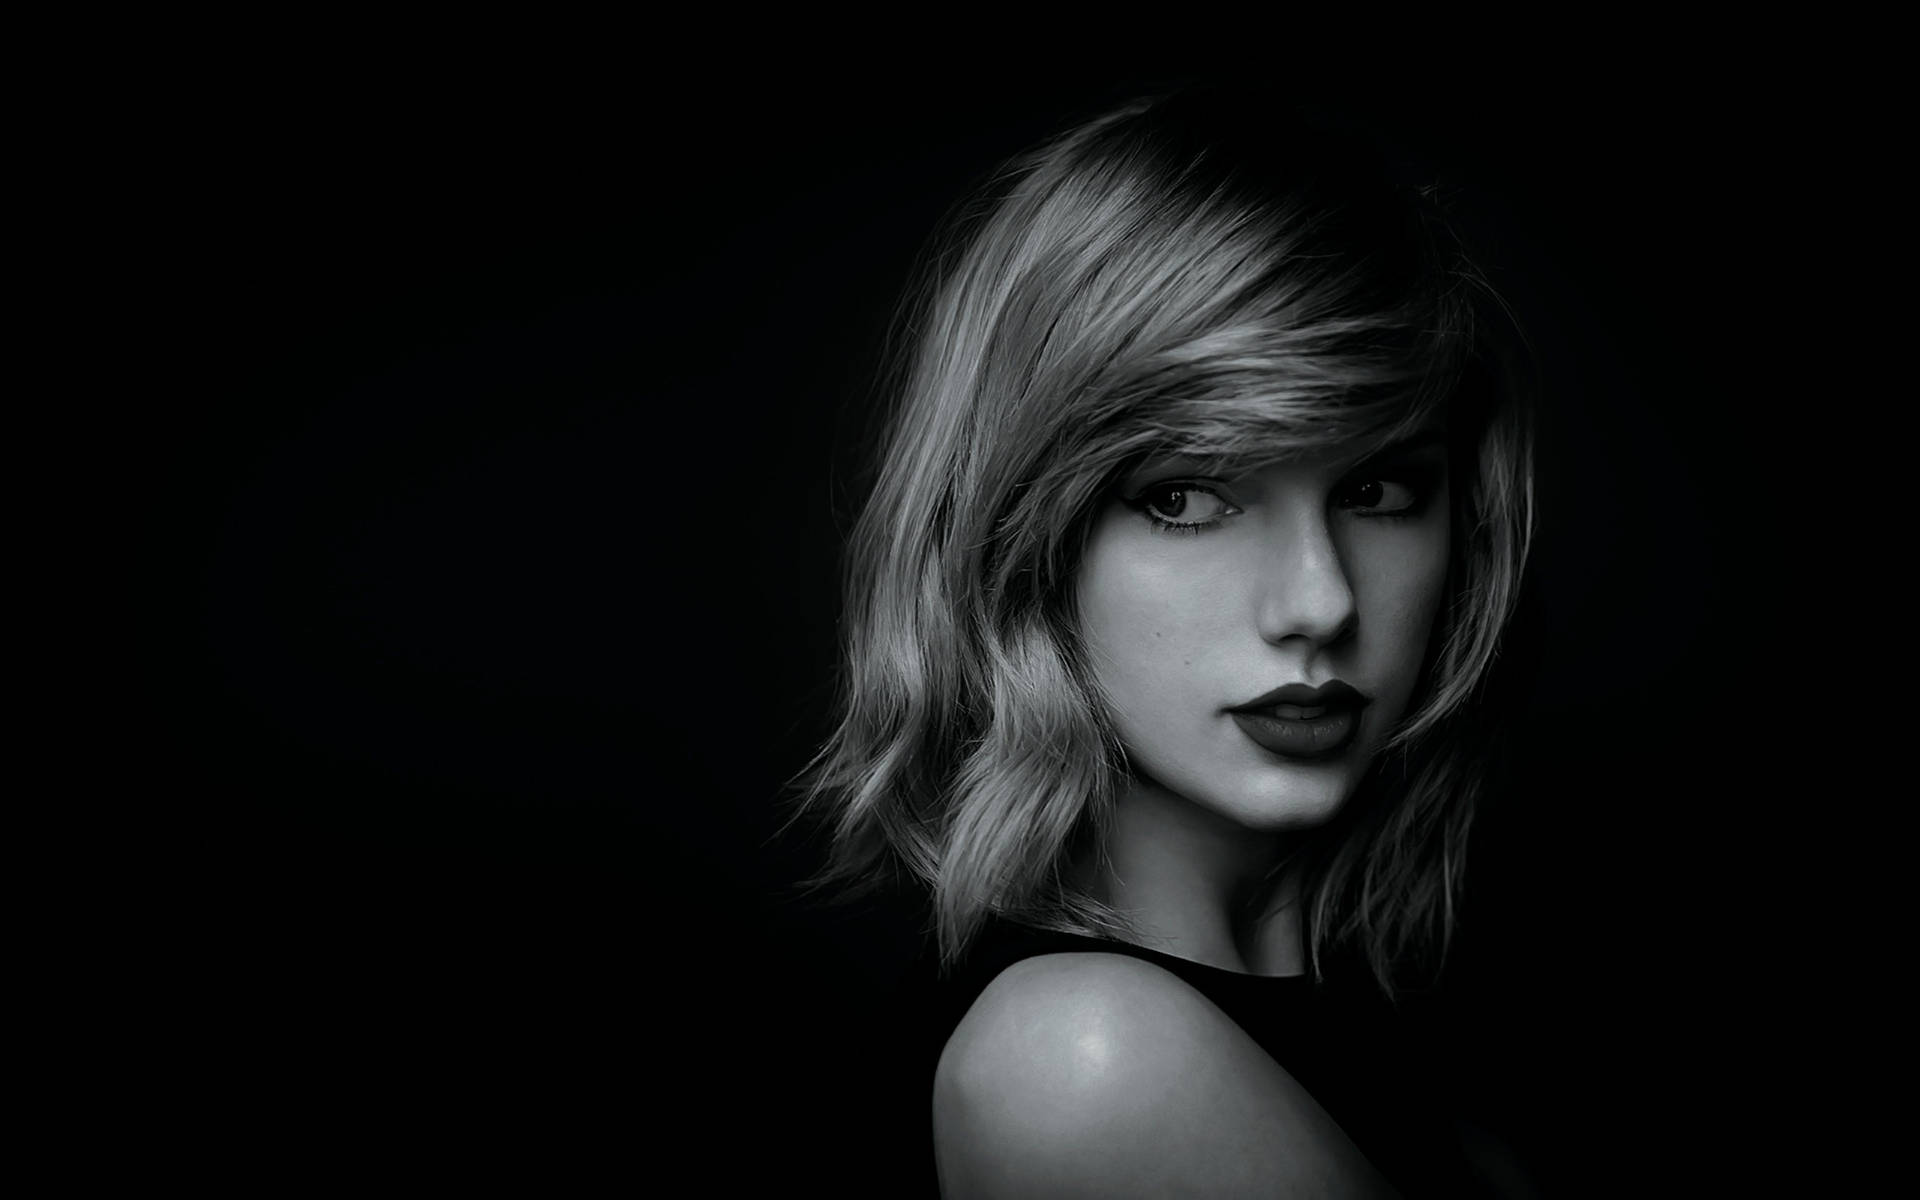 Taylor Swift black and white portrait, music or song writer.